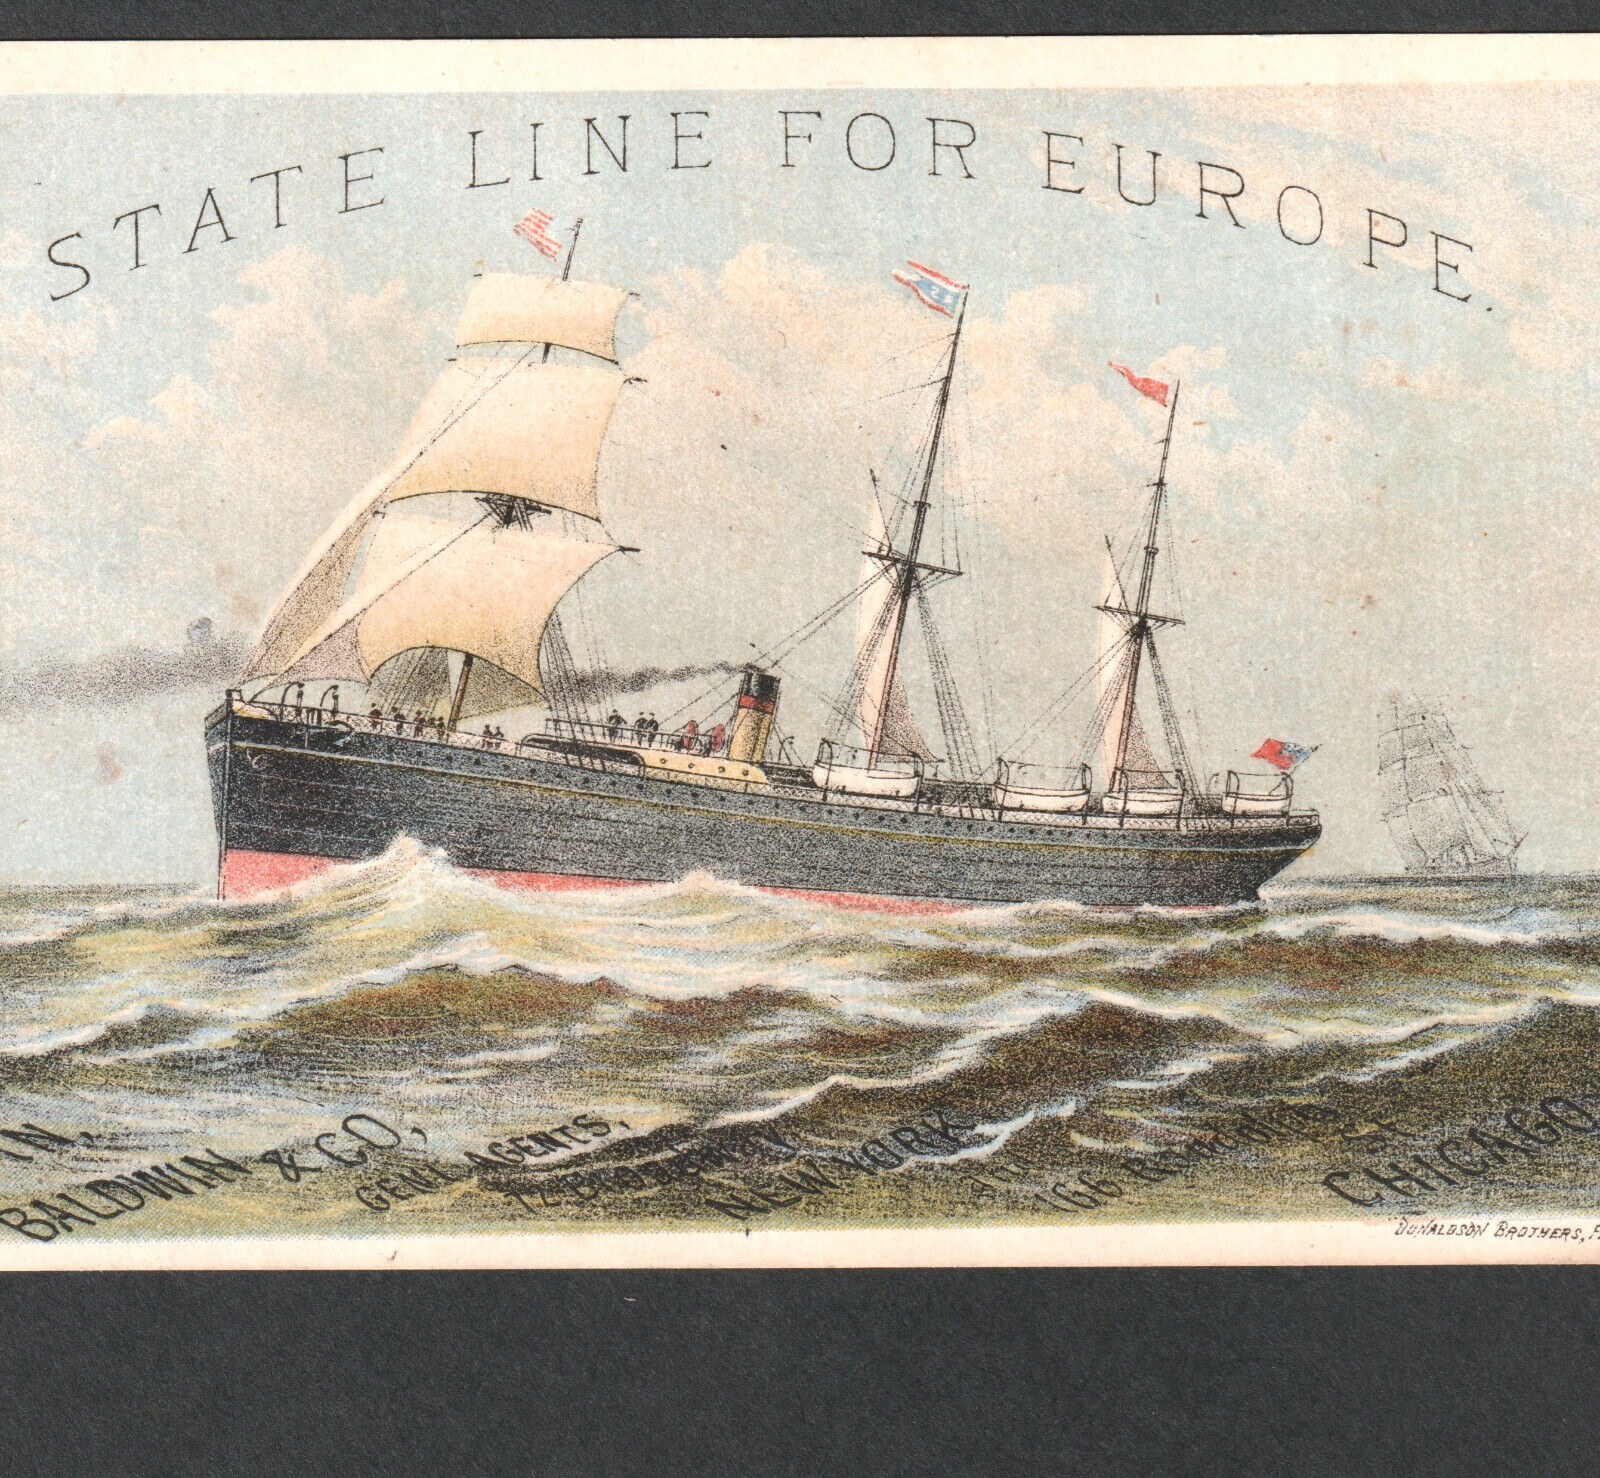 State Line for Europe New York Sea Ship 1800's Steamship Advertising Trade Card